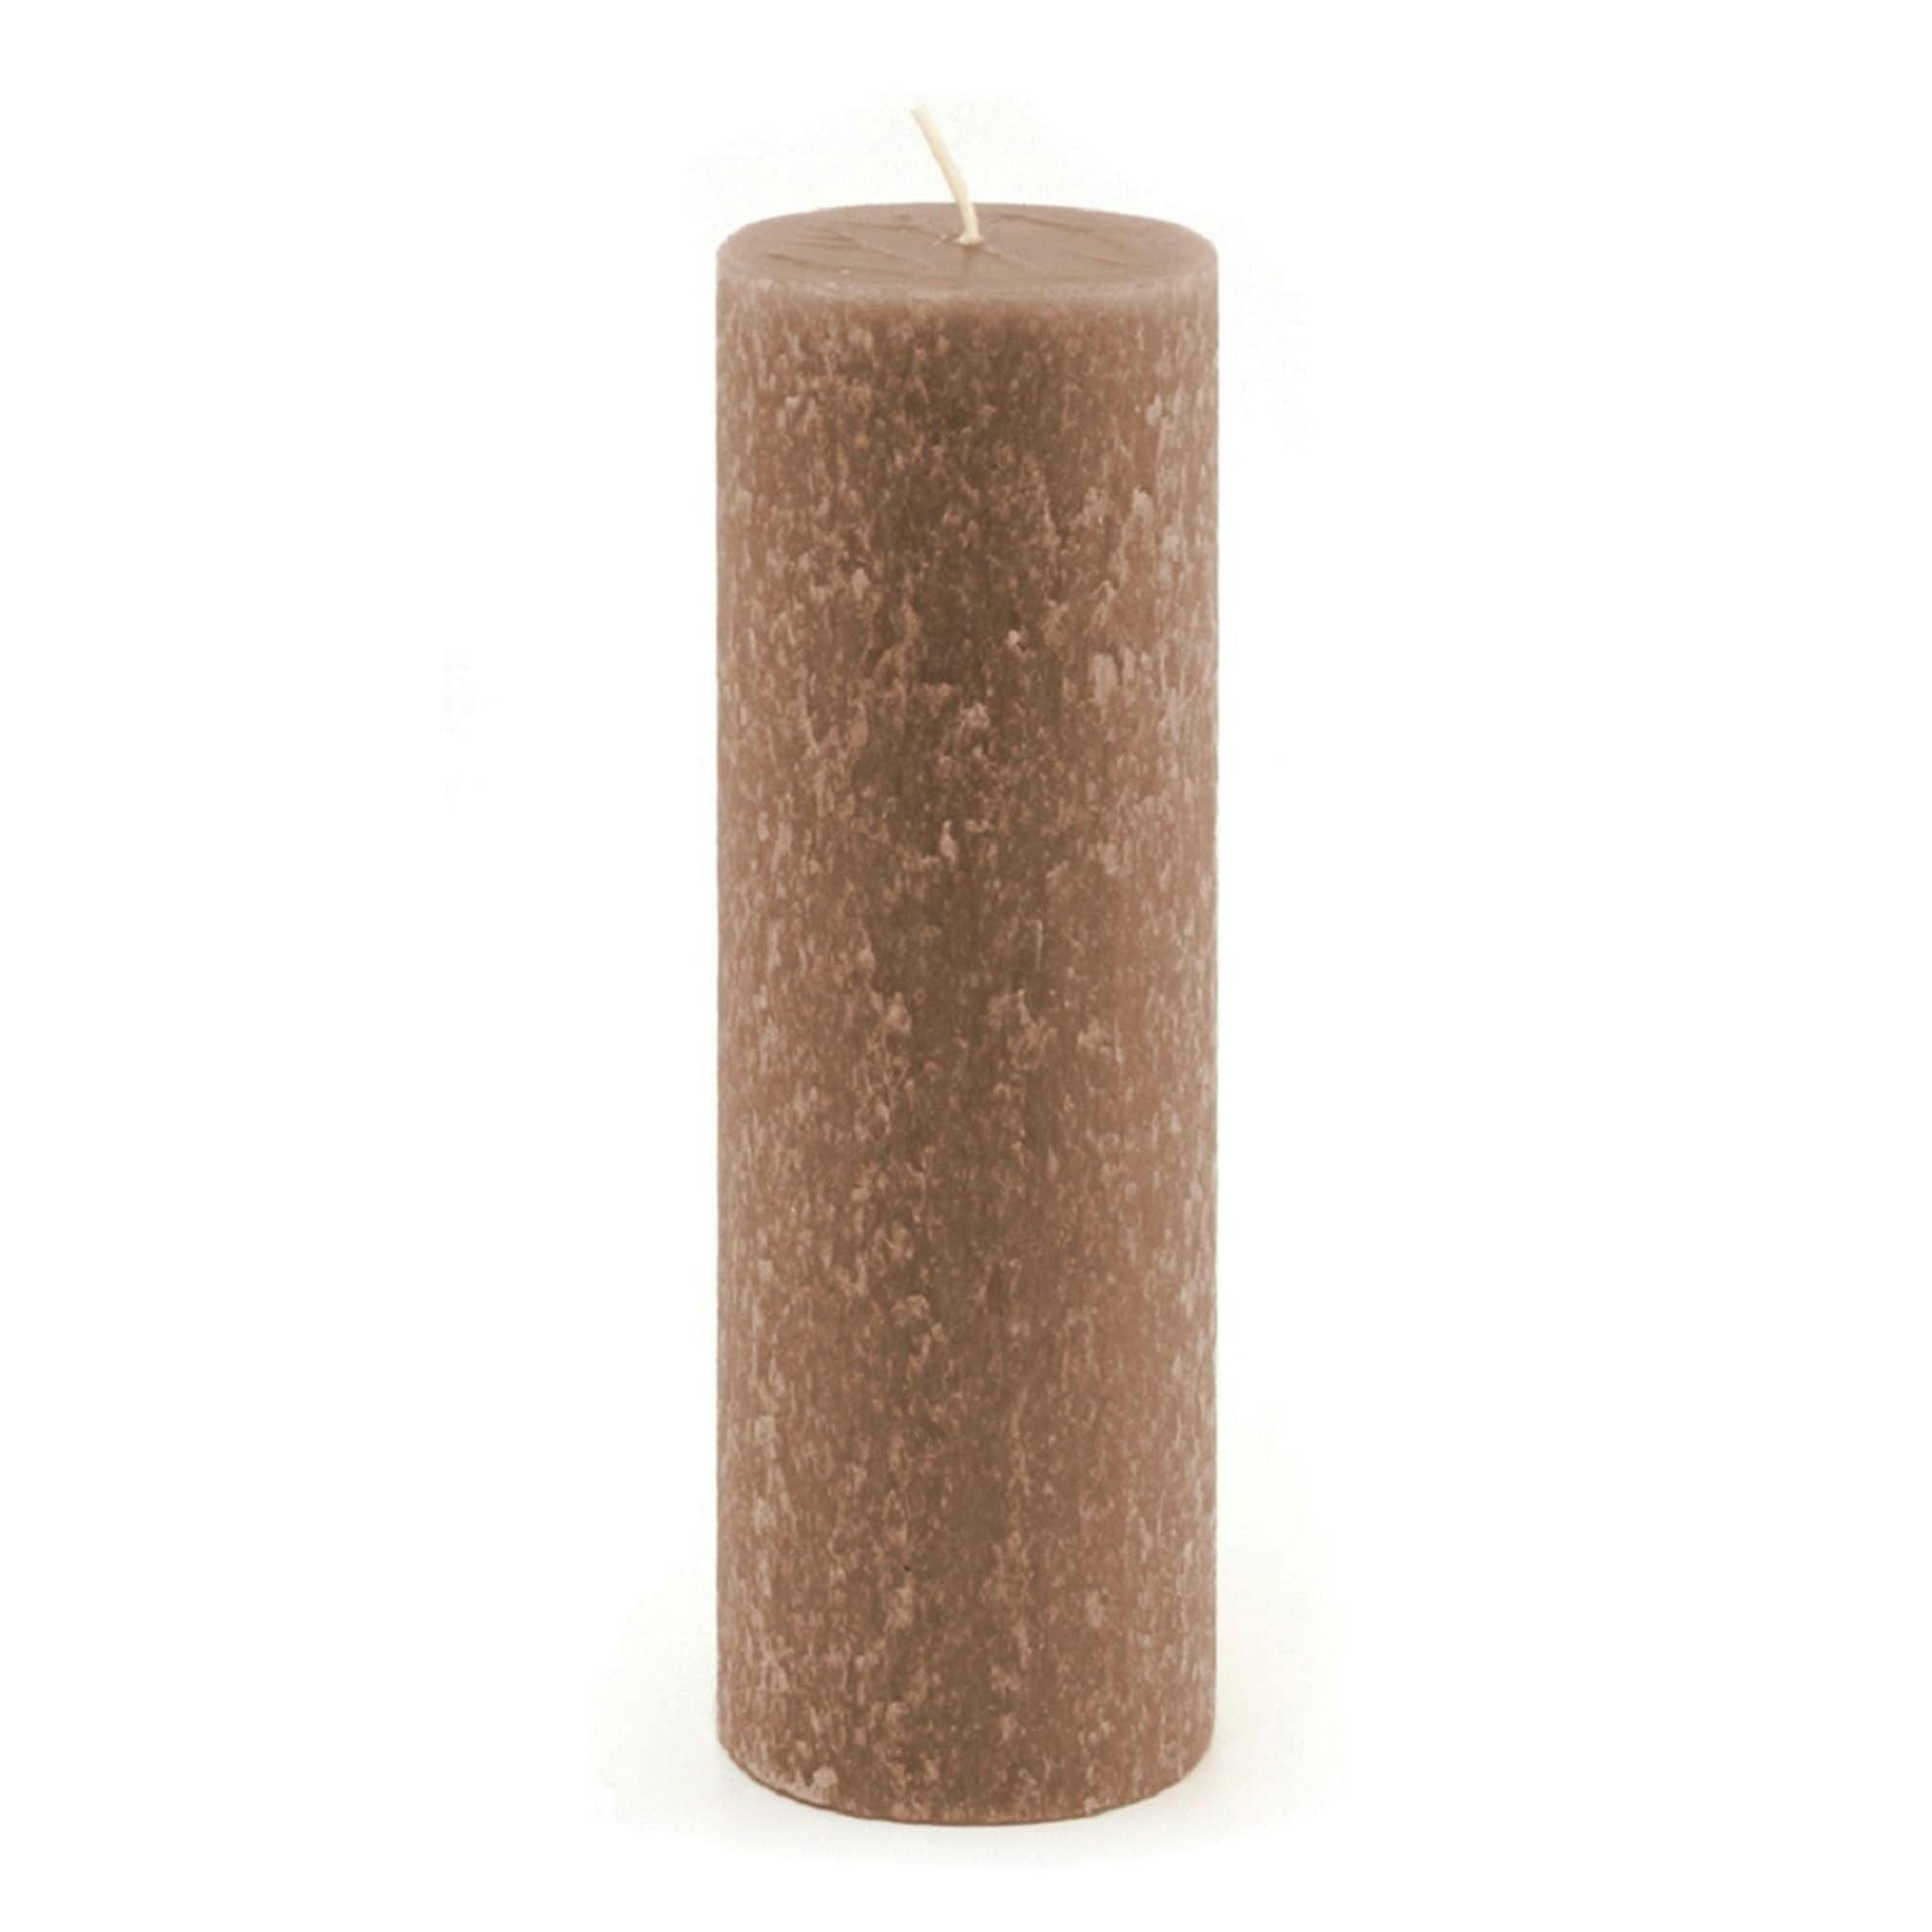 Portobello Beeswax 9" Scented Pillar Candle for Valentine's Day